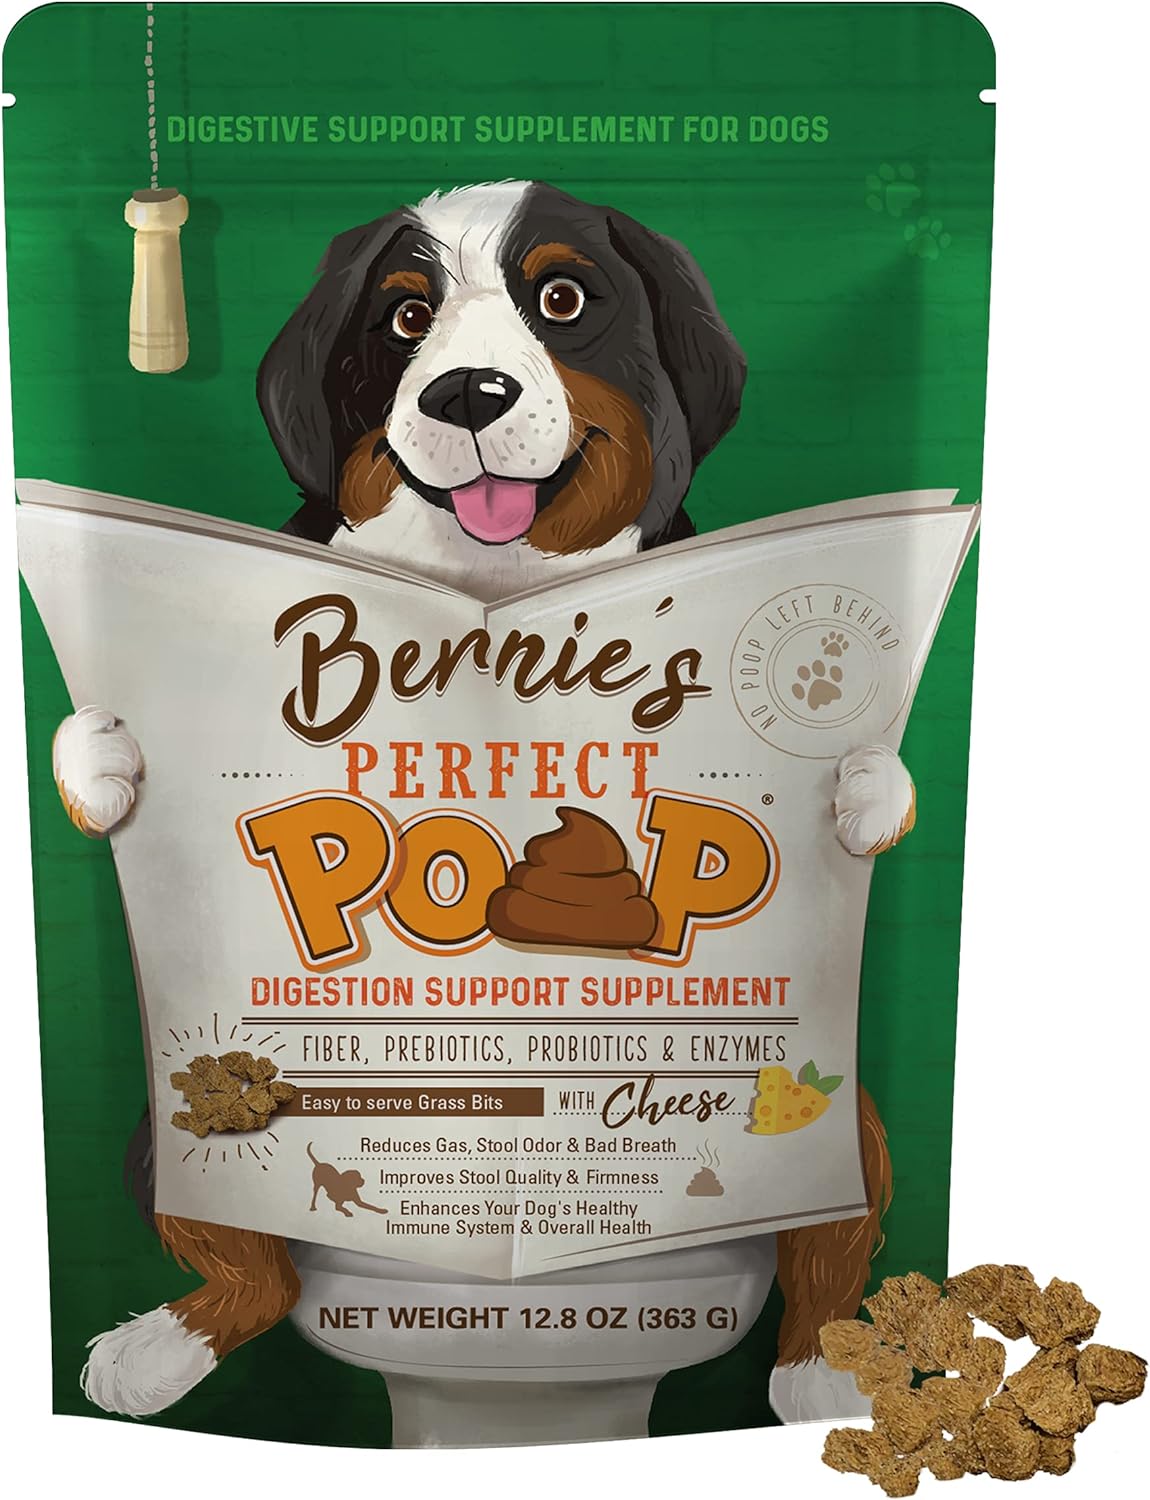 Bernie’s Best Perfect Poop Digestion & General Health Supplement for Dogs